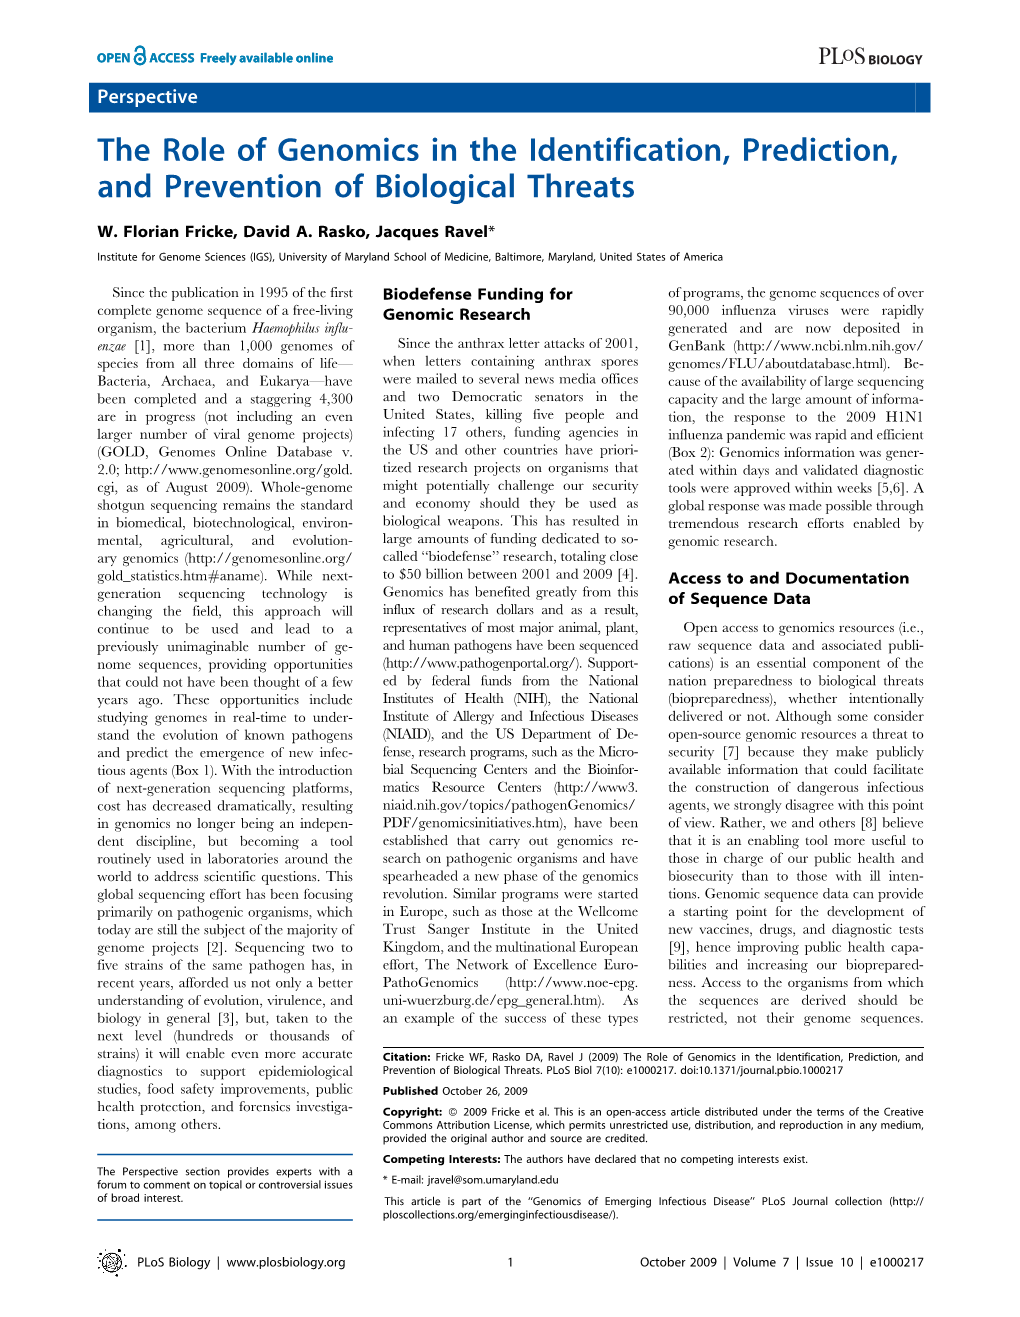 The Role of Genomics in the Identification, Prediction, and Prevention of Biological Threats